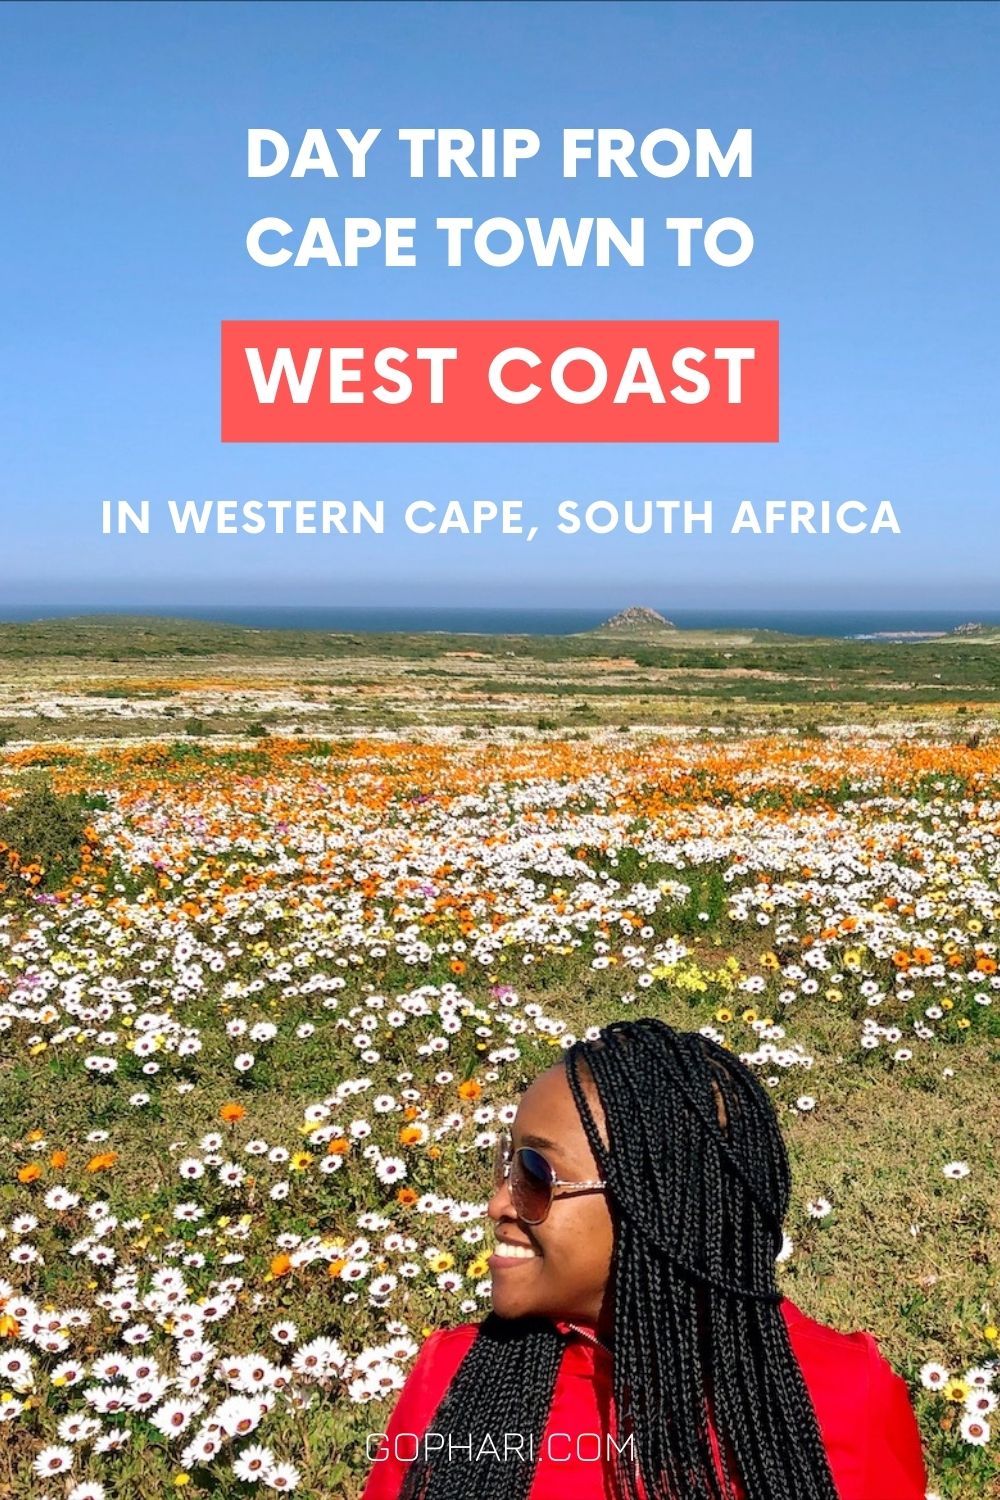 Western Cape Holidays & Vacations - Holiday in Western Cape